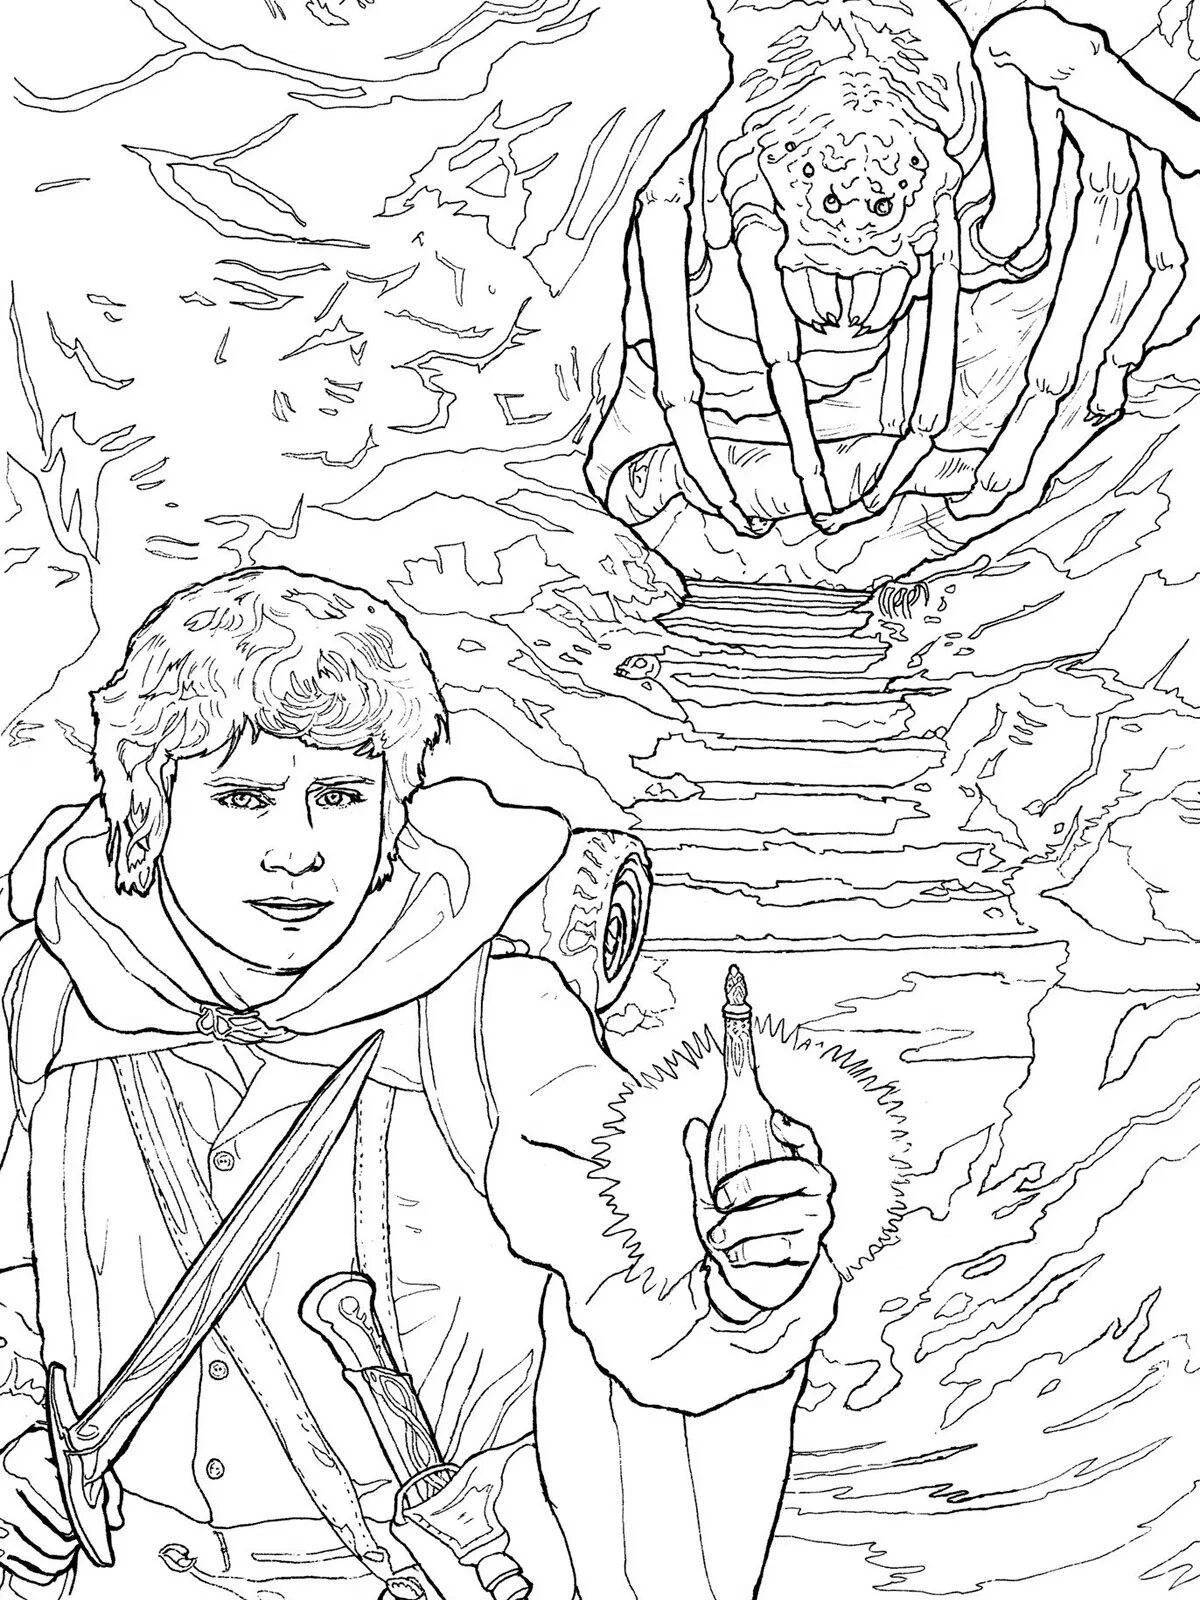 Tolkien's great creature coloring book